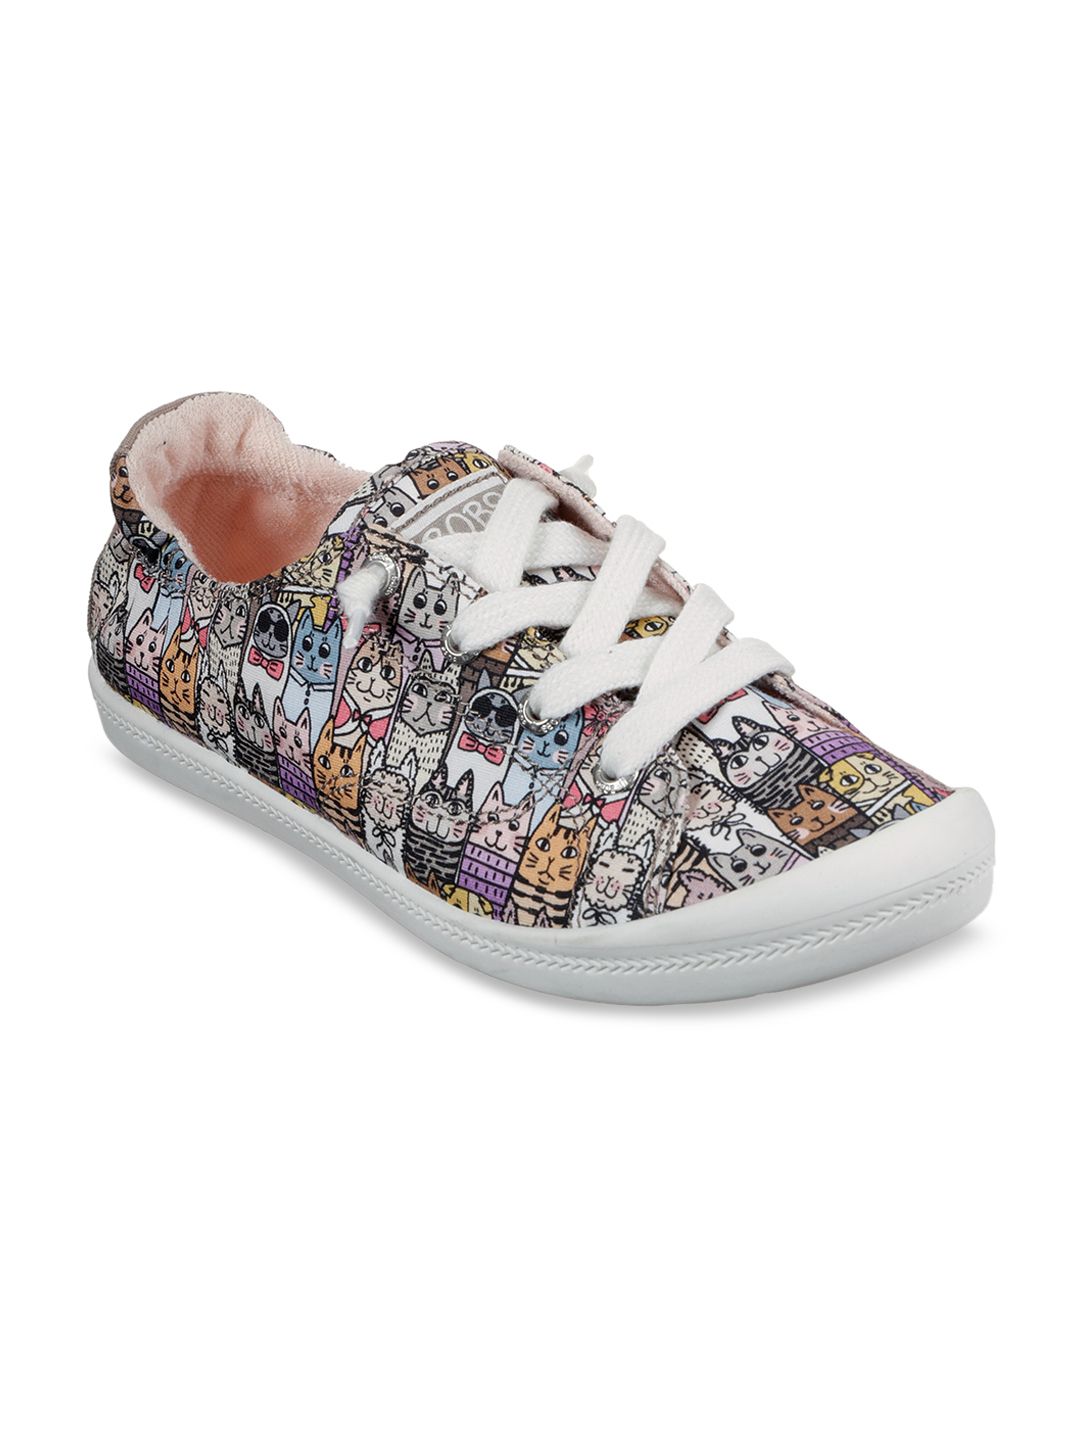 Skechers Women White Kitty Print Casual Sneakers Price in India